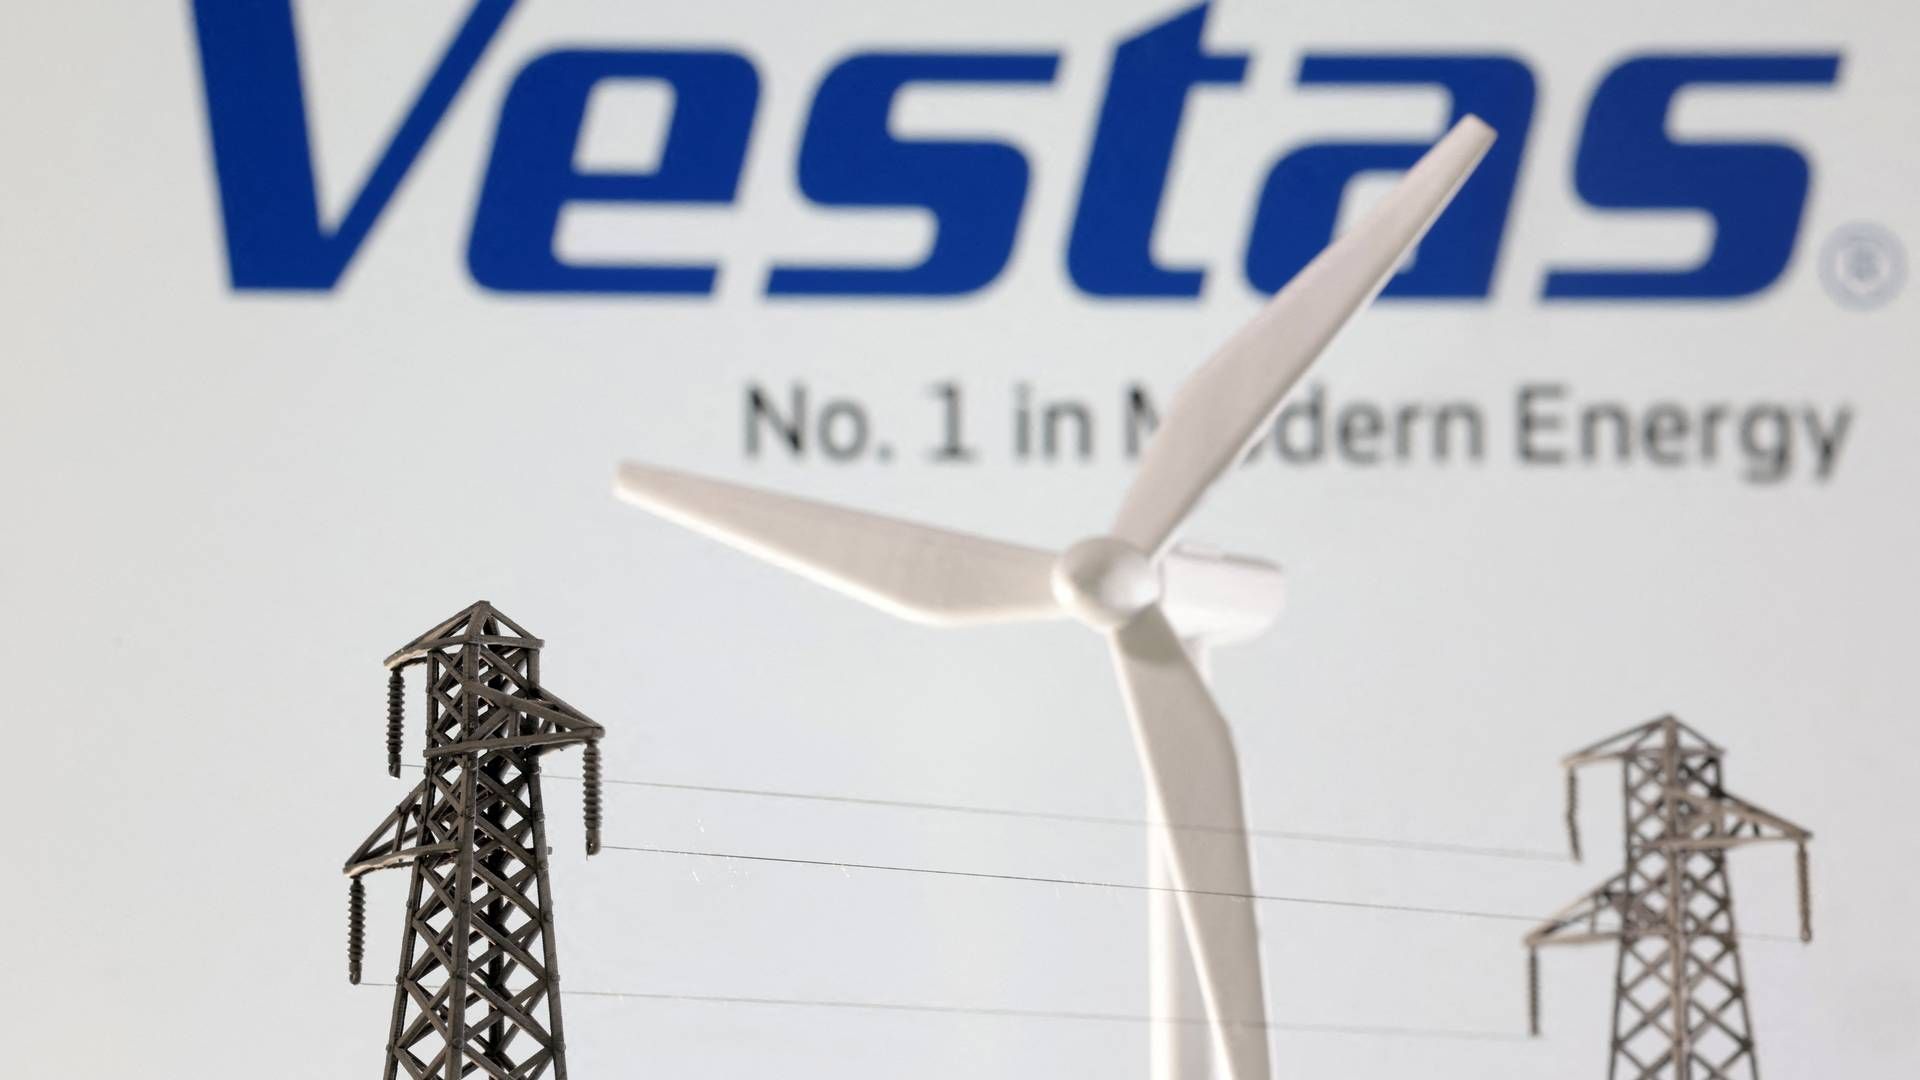 During the day, Vestas added a total of 830 MW to its order book. | Photo: Dado Ruvic/Reuters/Ritzau Scanpix